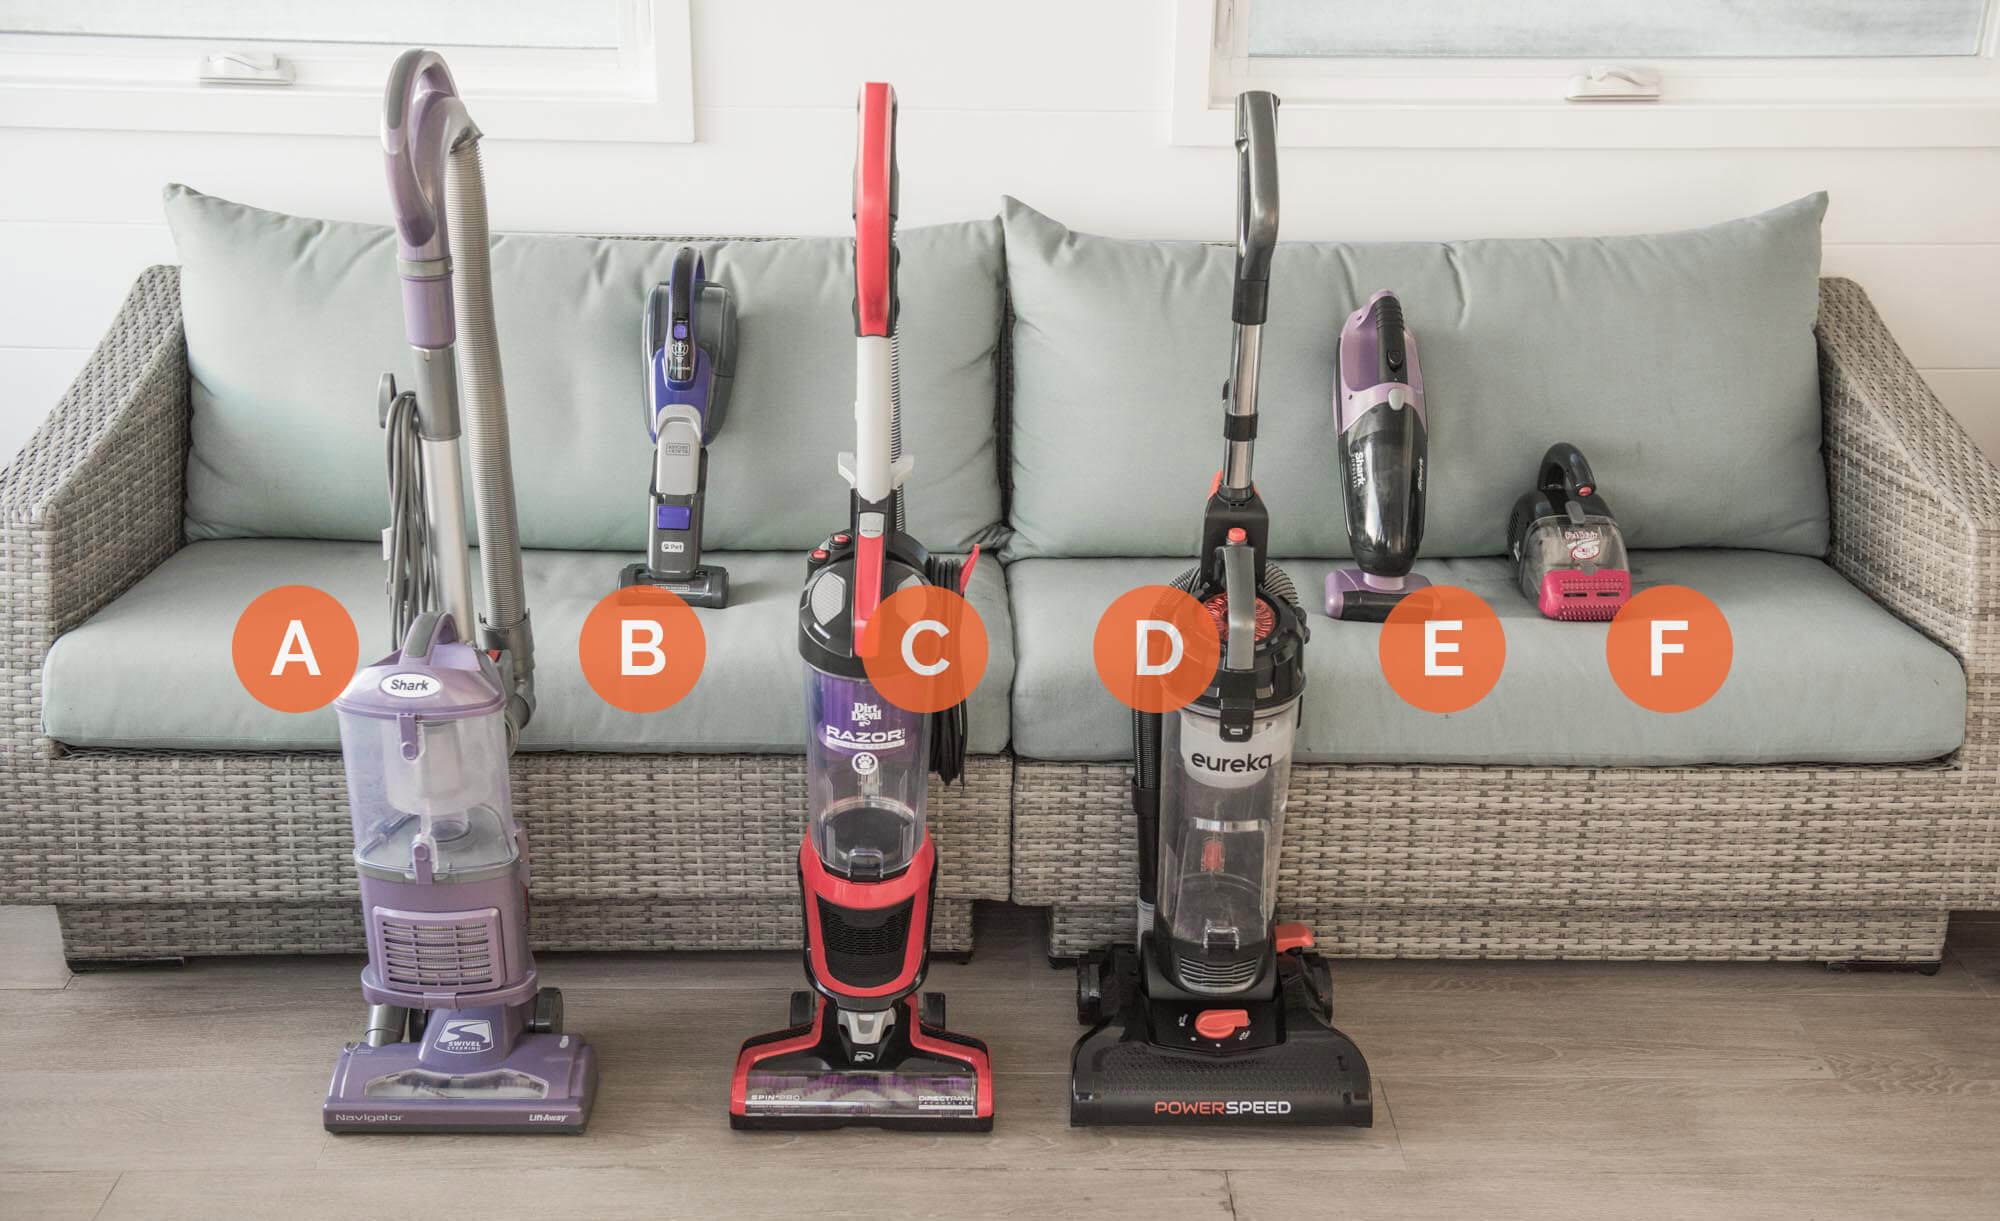 The Best Pet Hair Vacuums Of 2021, The Best Vacuum For Hardwood Floors And Pet Hair